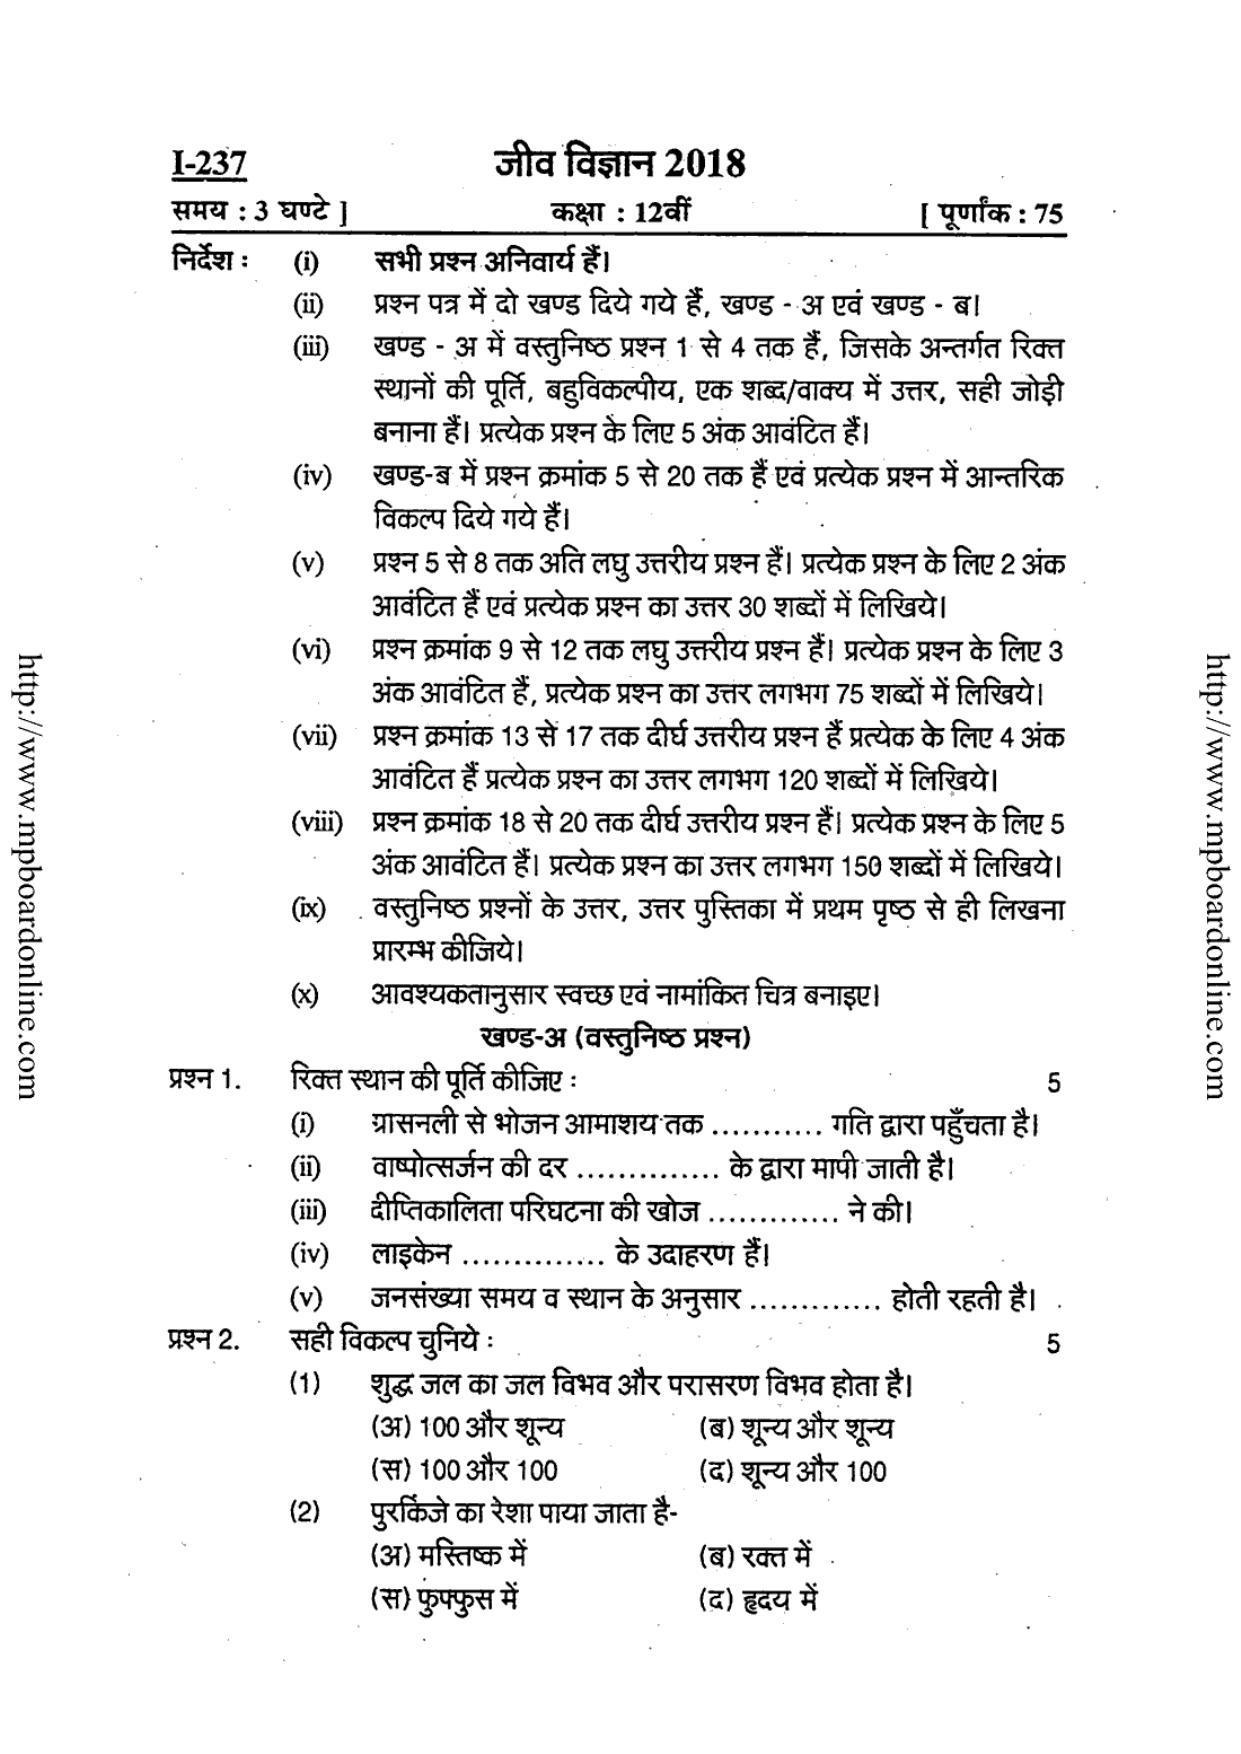 MP Board Class 12 Biology 2018 Question Paper - Page 1